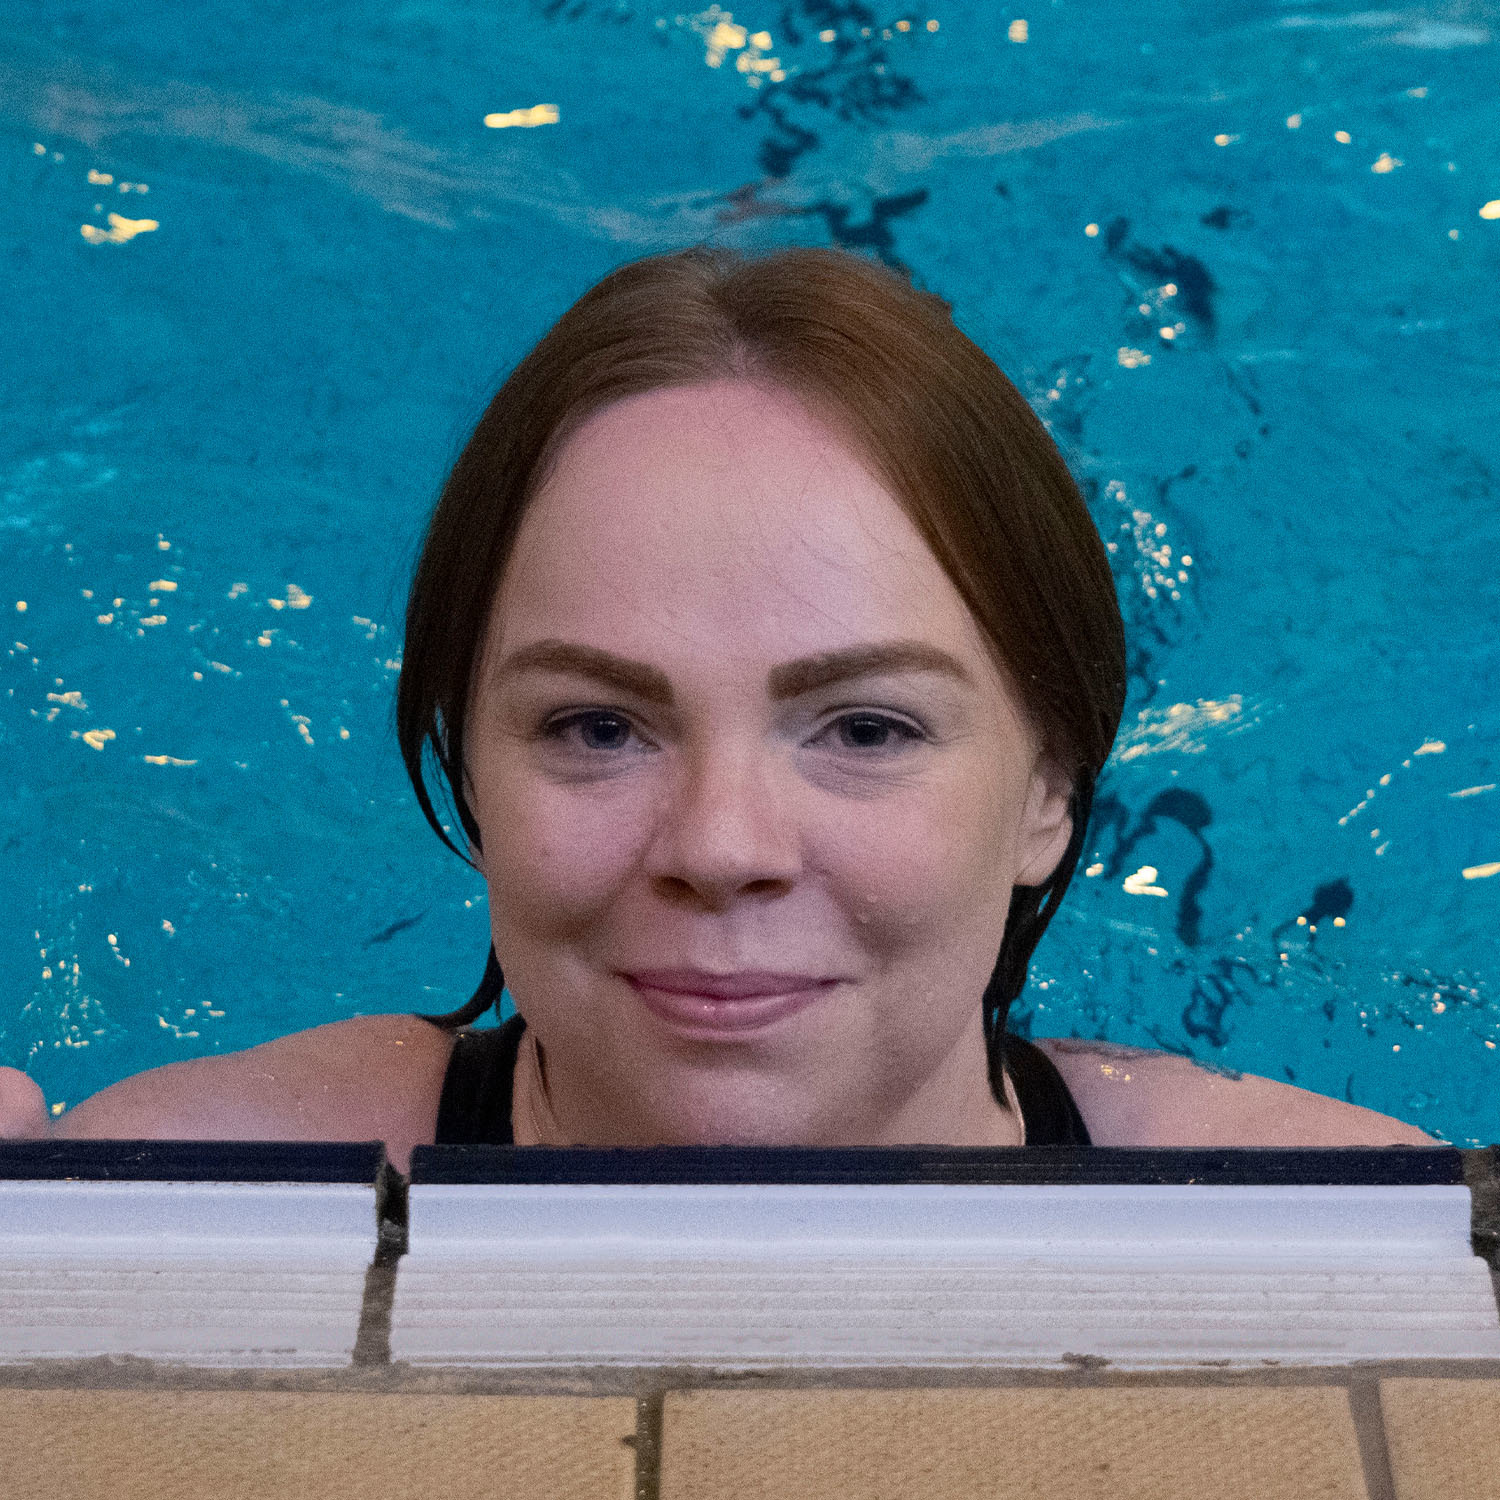 Smiling lady in swimming pool